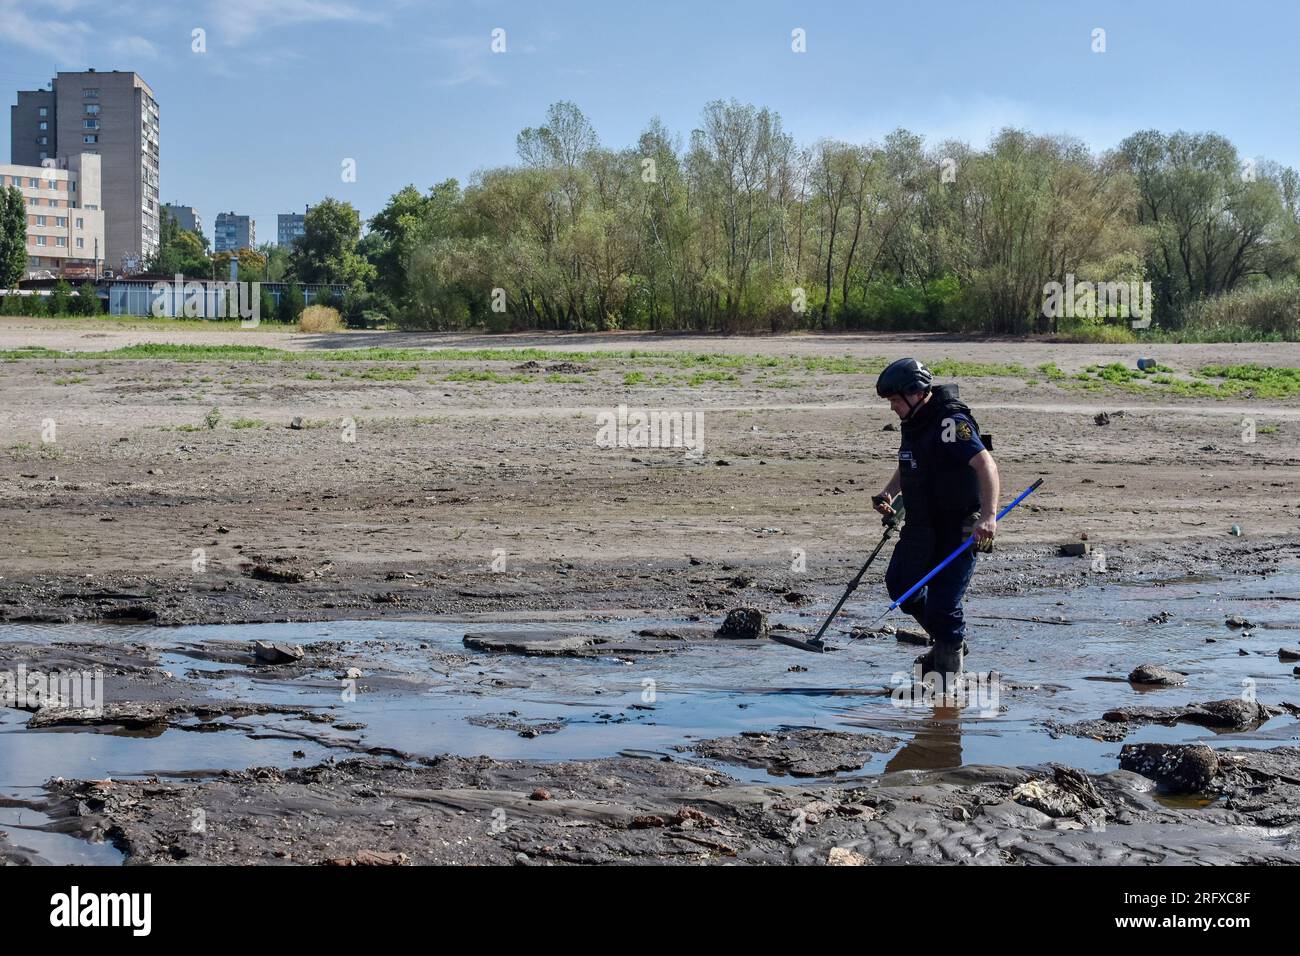 A Ukrainian sapper inspects the shoreline during the demining of a Dnipro river in Zaporizhzhia. Ukraine’s international partners will give it over US$244 million for humanitarian mine clearance. Source: Yuliia Svyrydenko, First Deputy Prime Minister and Minister of Economic Development and Trade of Ukraine. Ukraine will also receive individual mine clearance kits, explosive protective suits, quadcopters, and robotic systems for the disposal of ammunition. Stock Photo